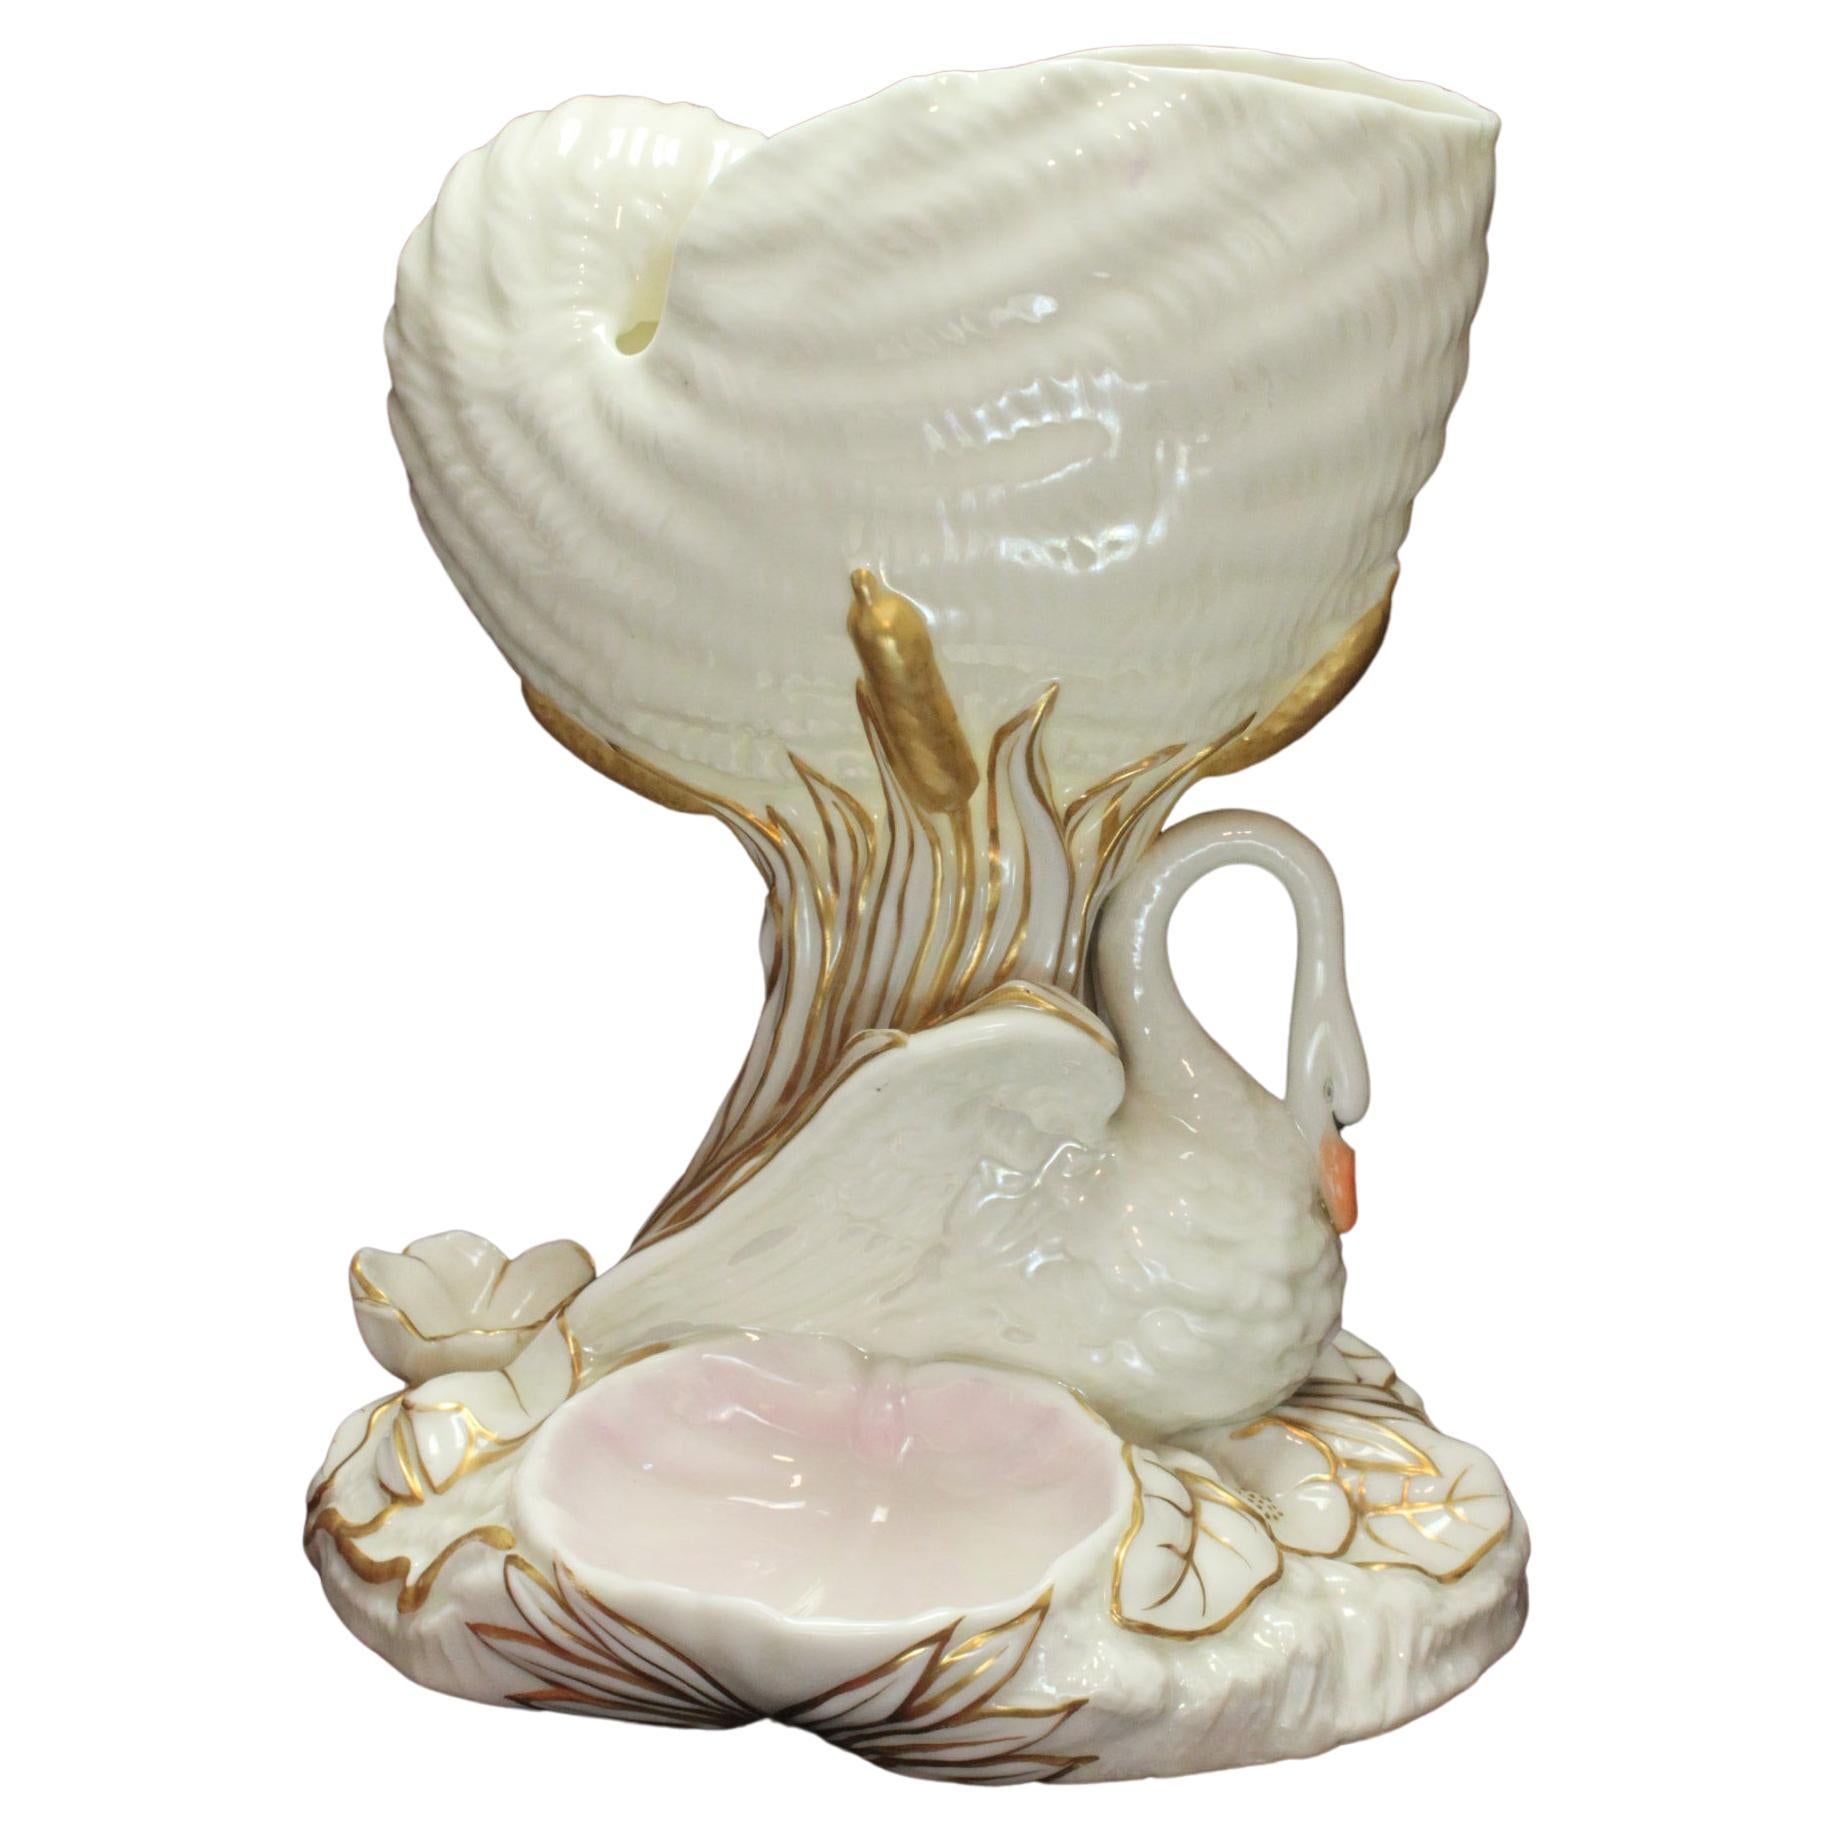 Royal Worcester Swan and Nautilus Shell Table Centrepiece